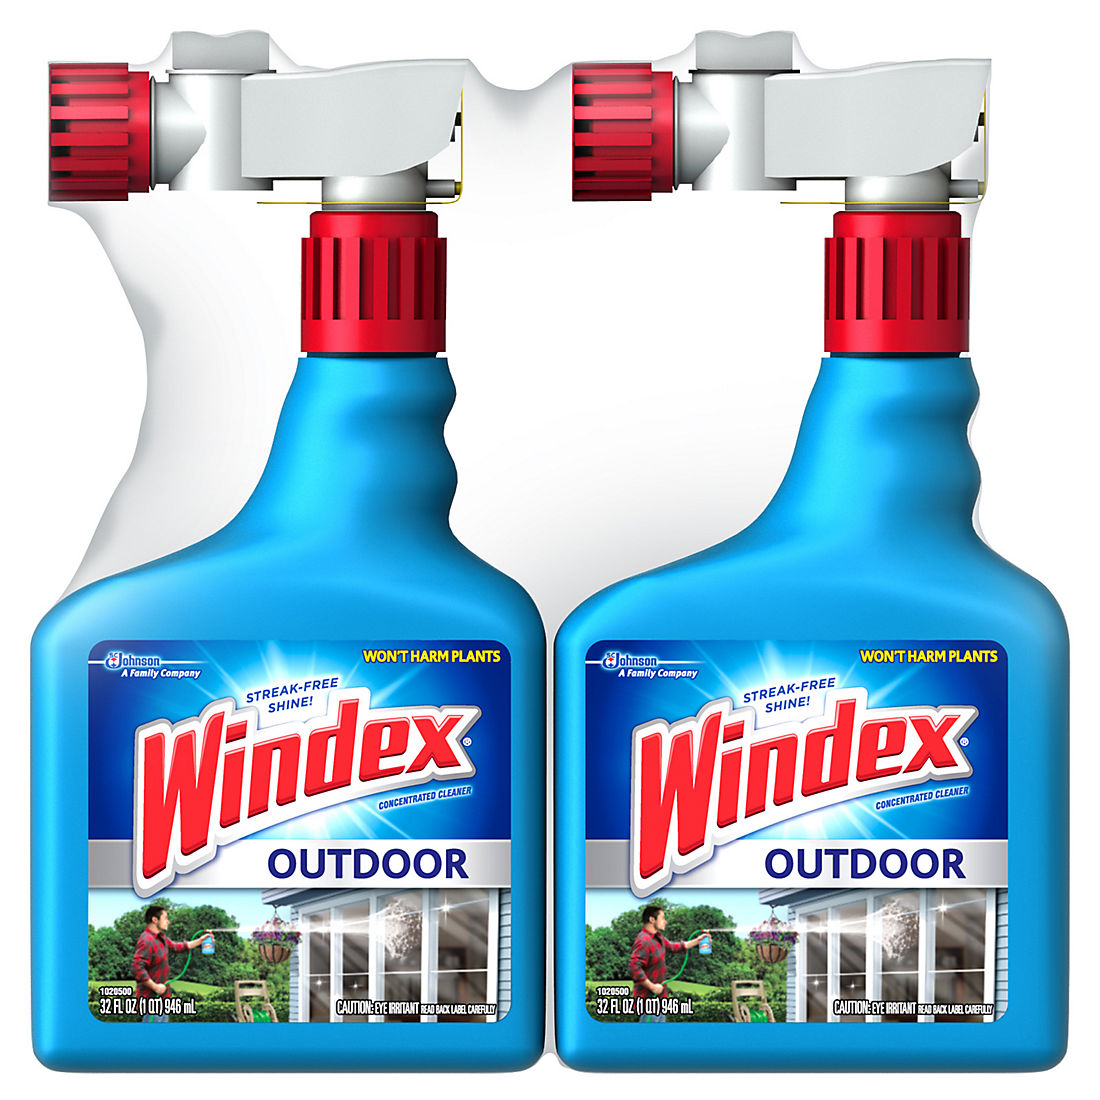 2 Packs Windex Outdoor Glass Cleaning Tool Cleans 80 Windows 4 Refill Pads